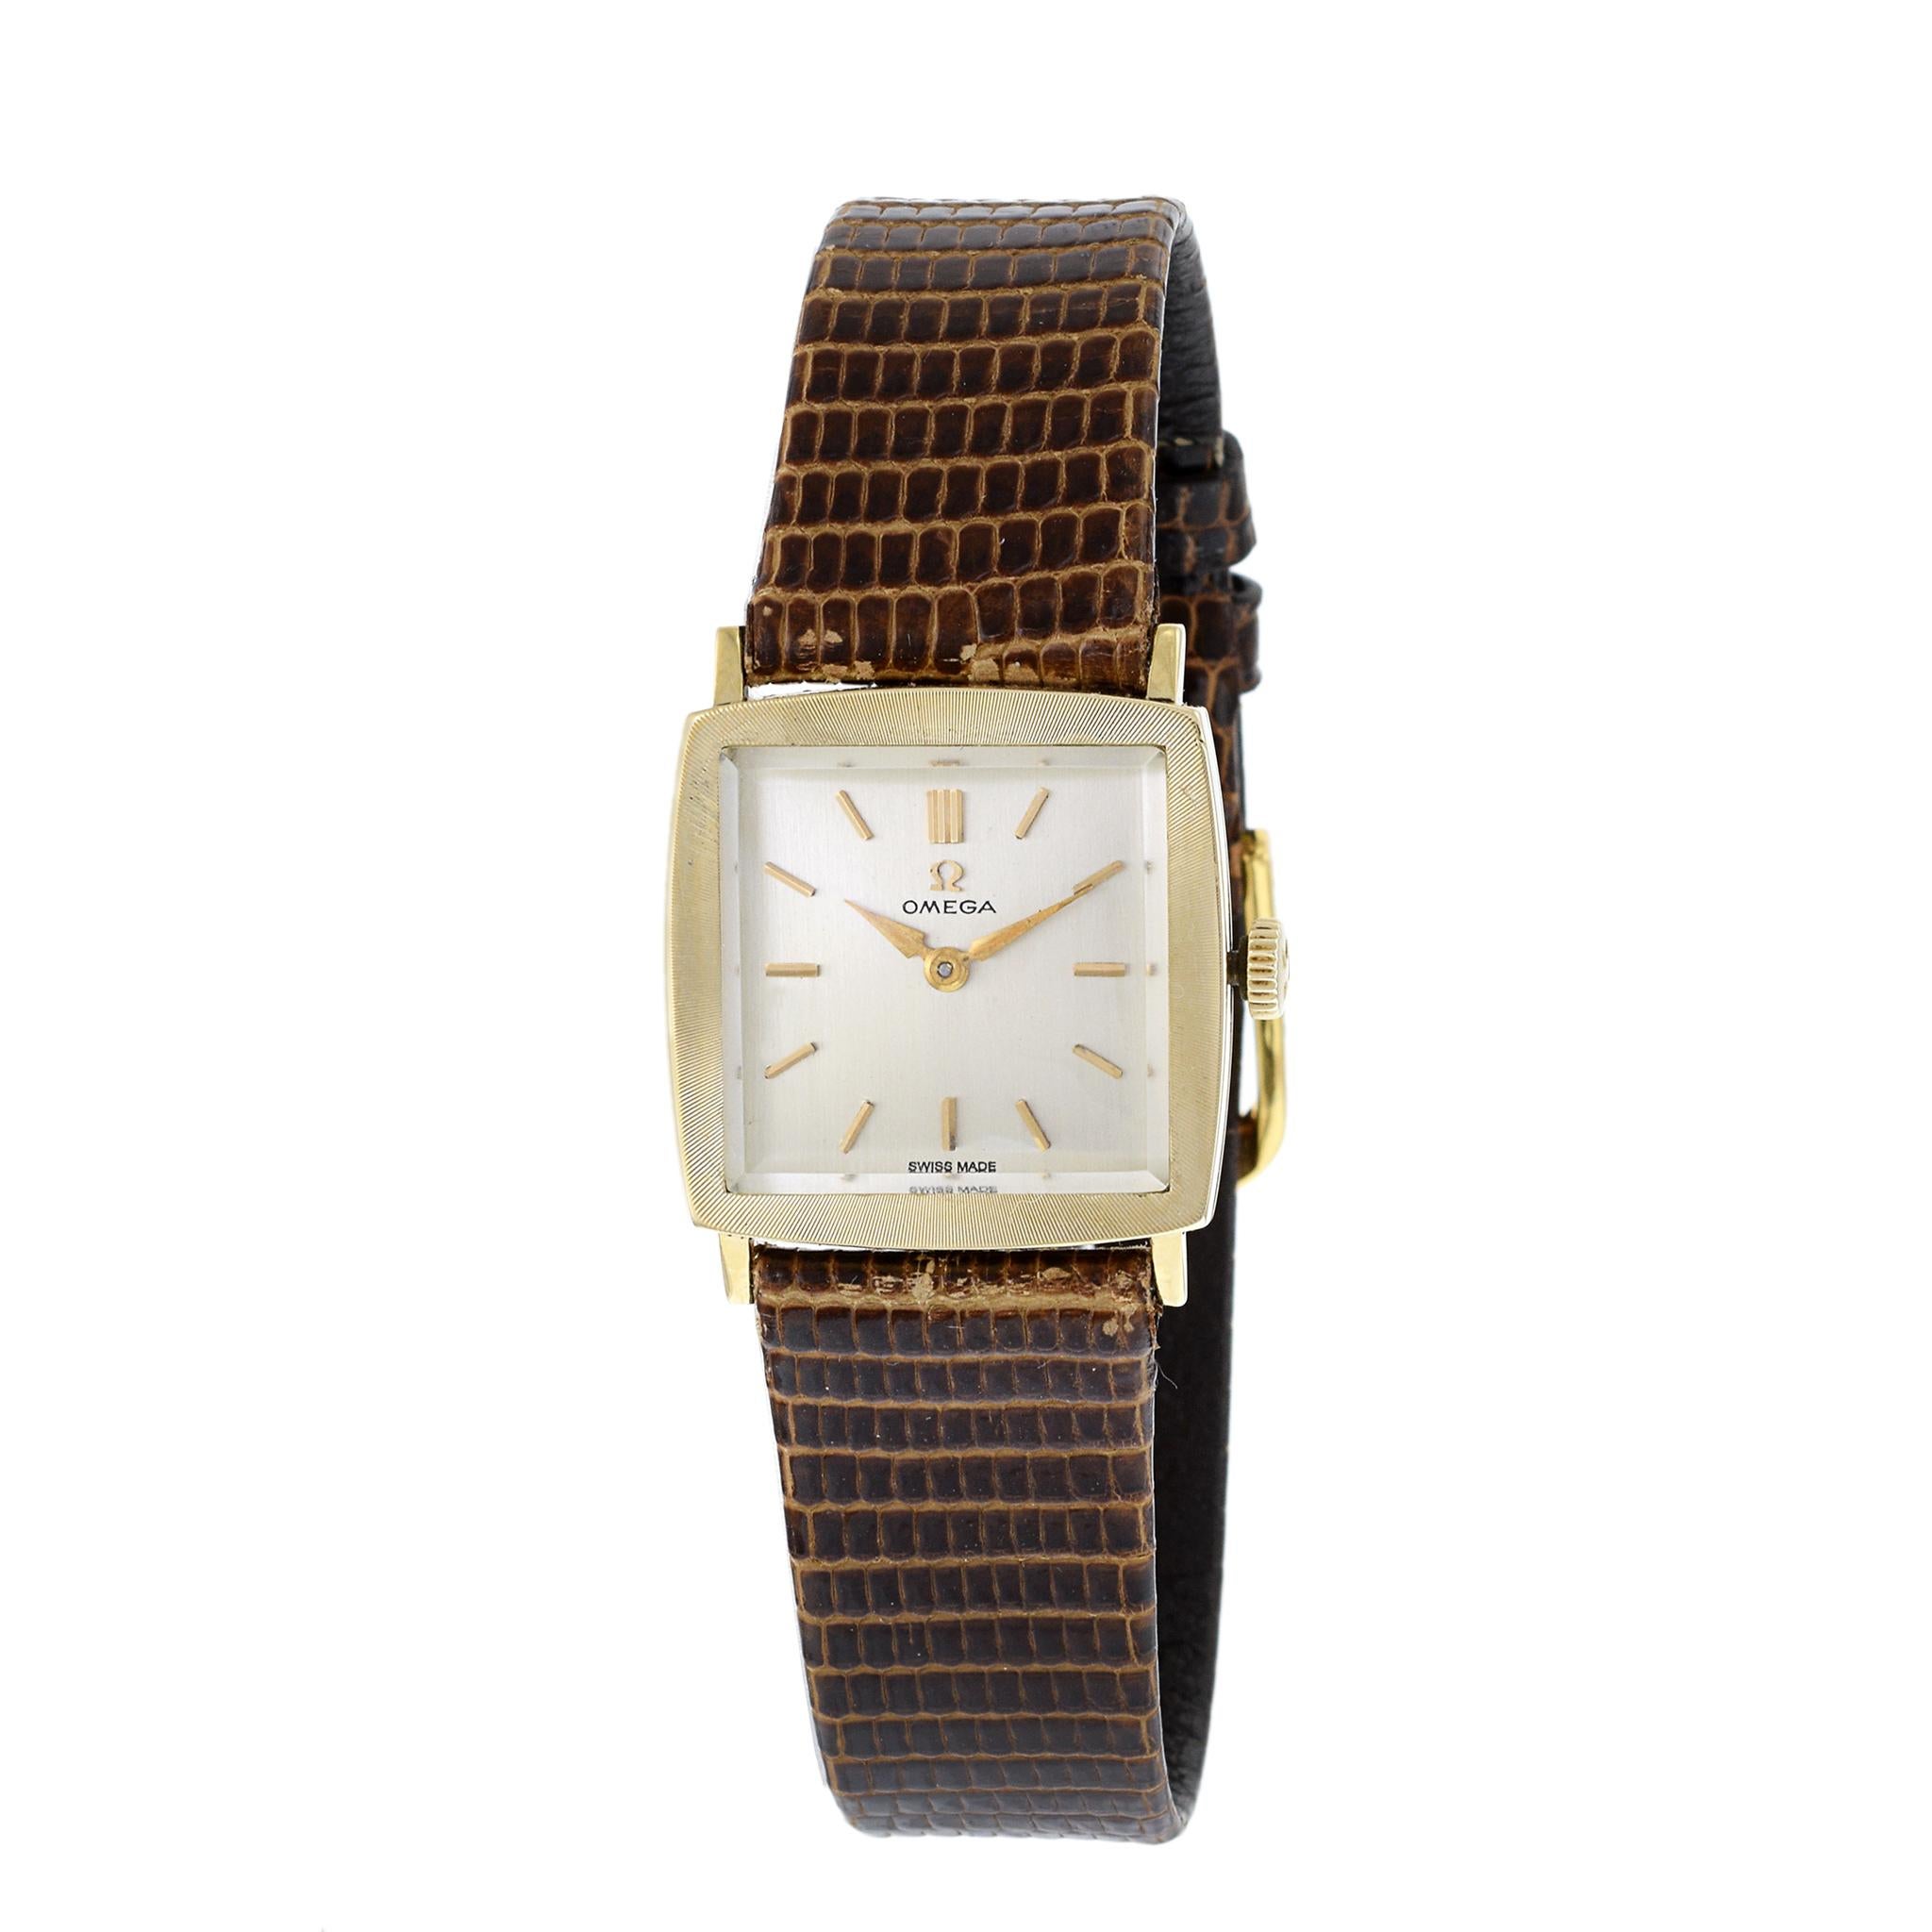 This is a Omega tank watch in 14K yellow gold. This watch is a reference 6696. The watch is powered by a 17 jewel manual wind caliber 620 movement. This watch has a silver dial with baton markers and its original crown. It is triple signed on the